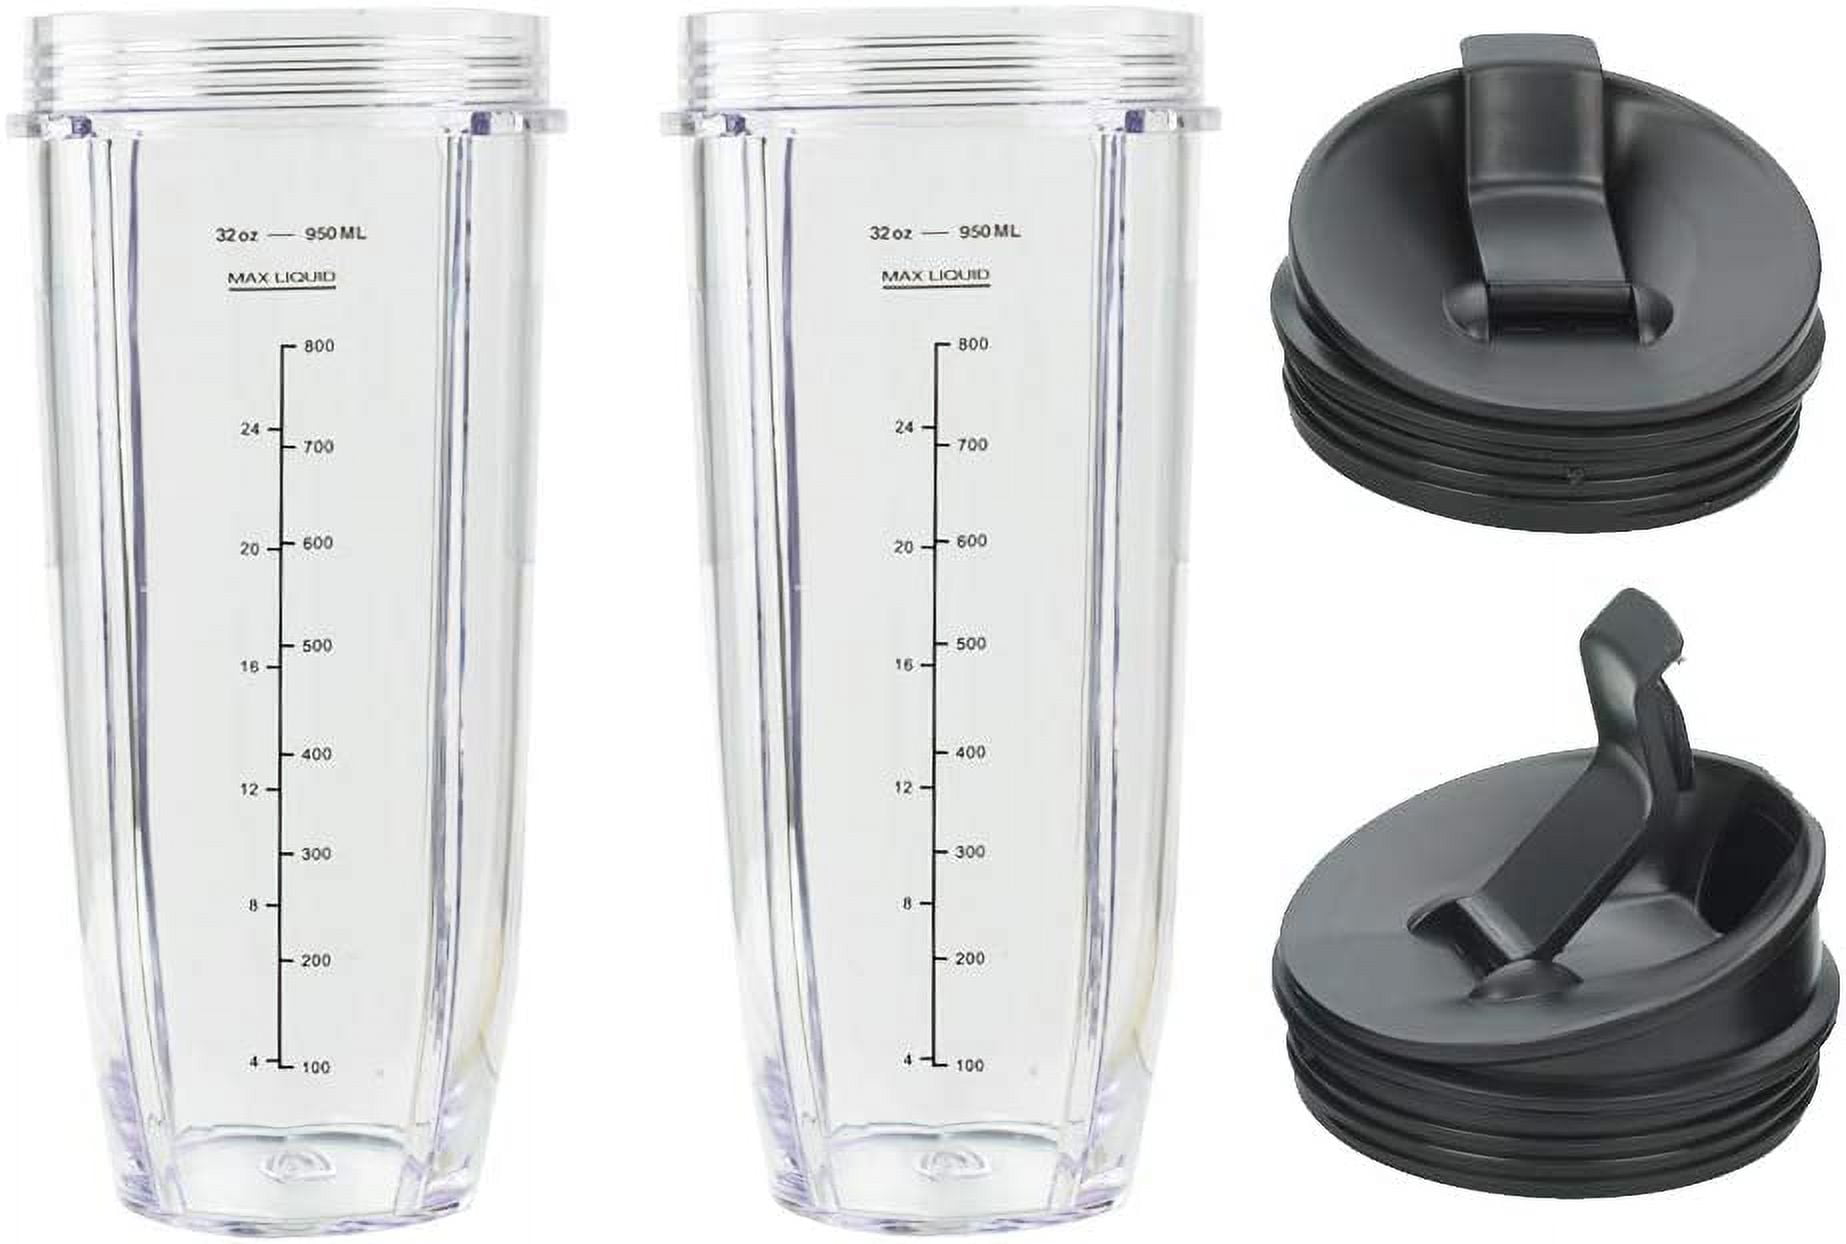 Nutri Ninja 32 oz Tritan Cups with Sip & Seal Lids. Compatible with BL480,  BL490, BL640, & BL680 Auto IQ Series Blenders (Pack of 2)